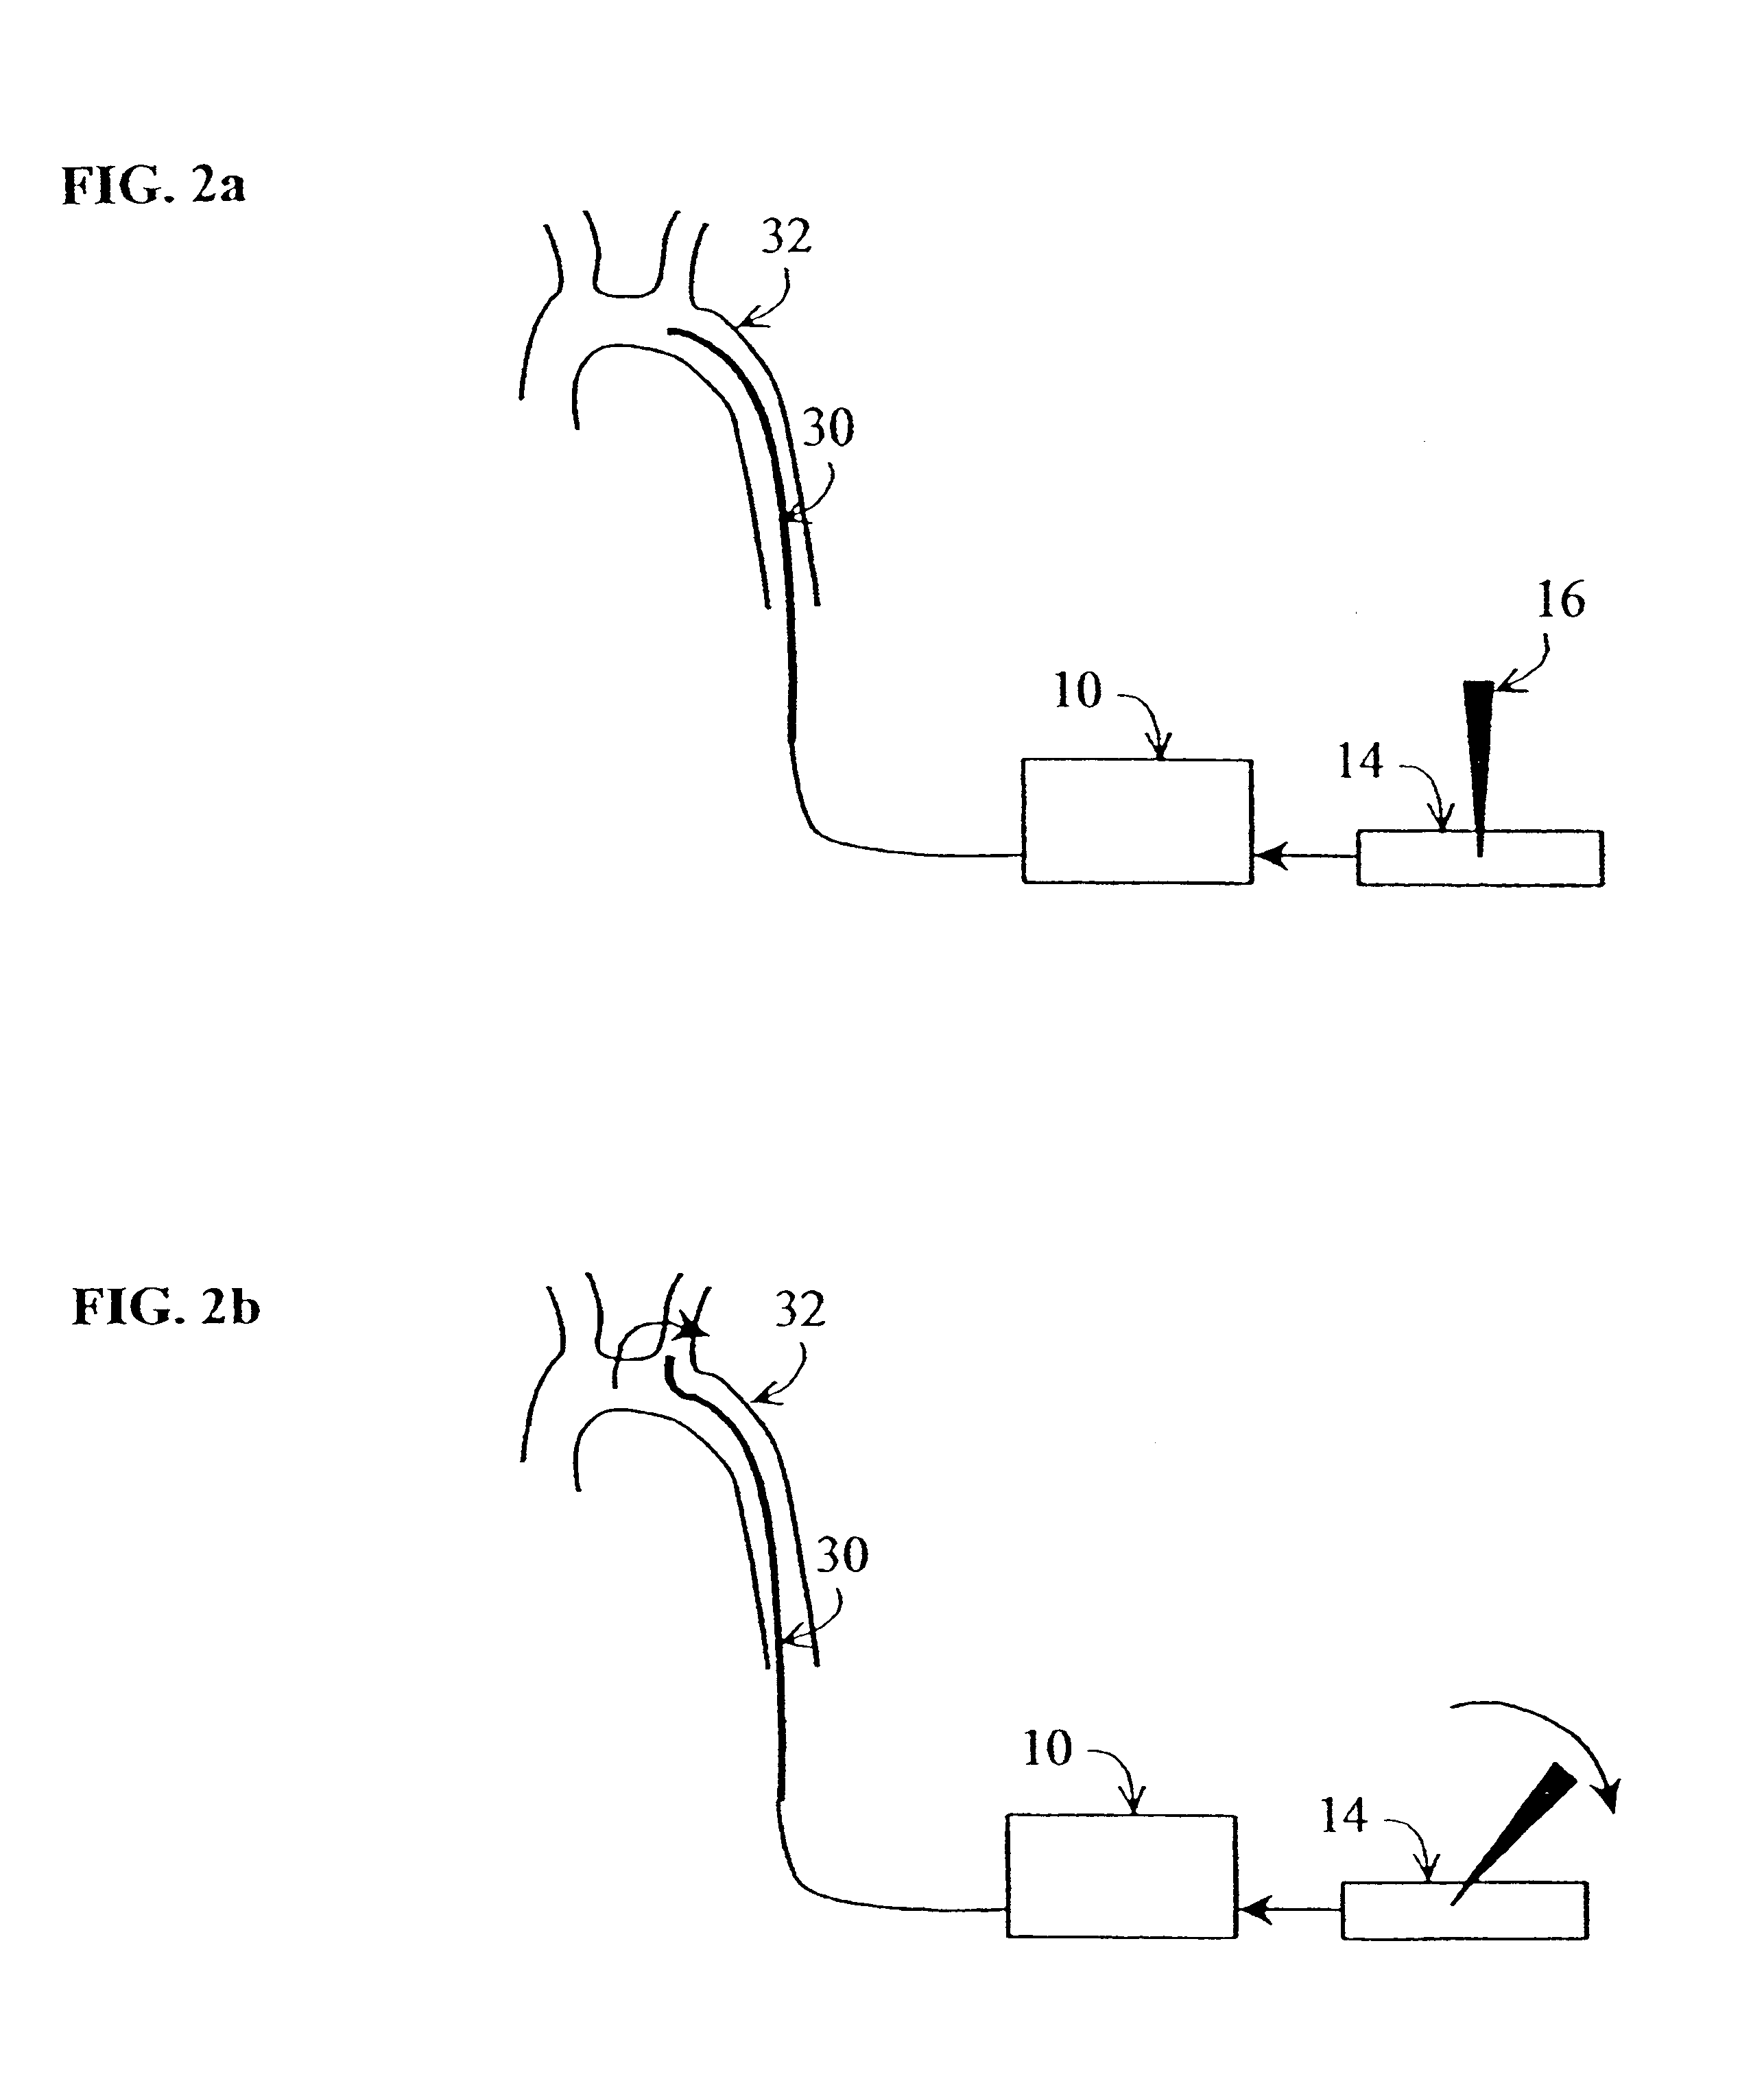 Method and apparatus for generating controlled torques on objects particularly objects inside a living body